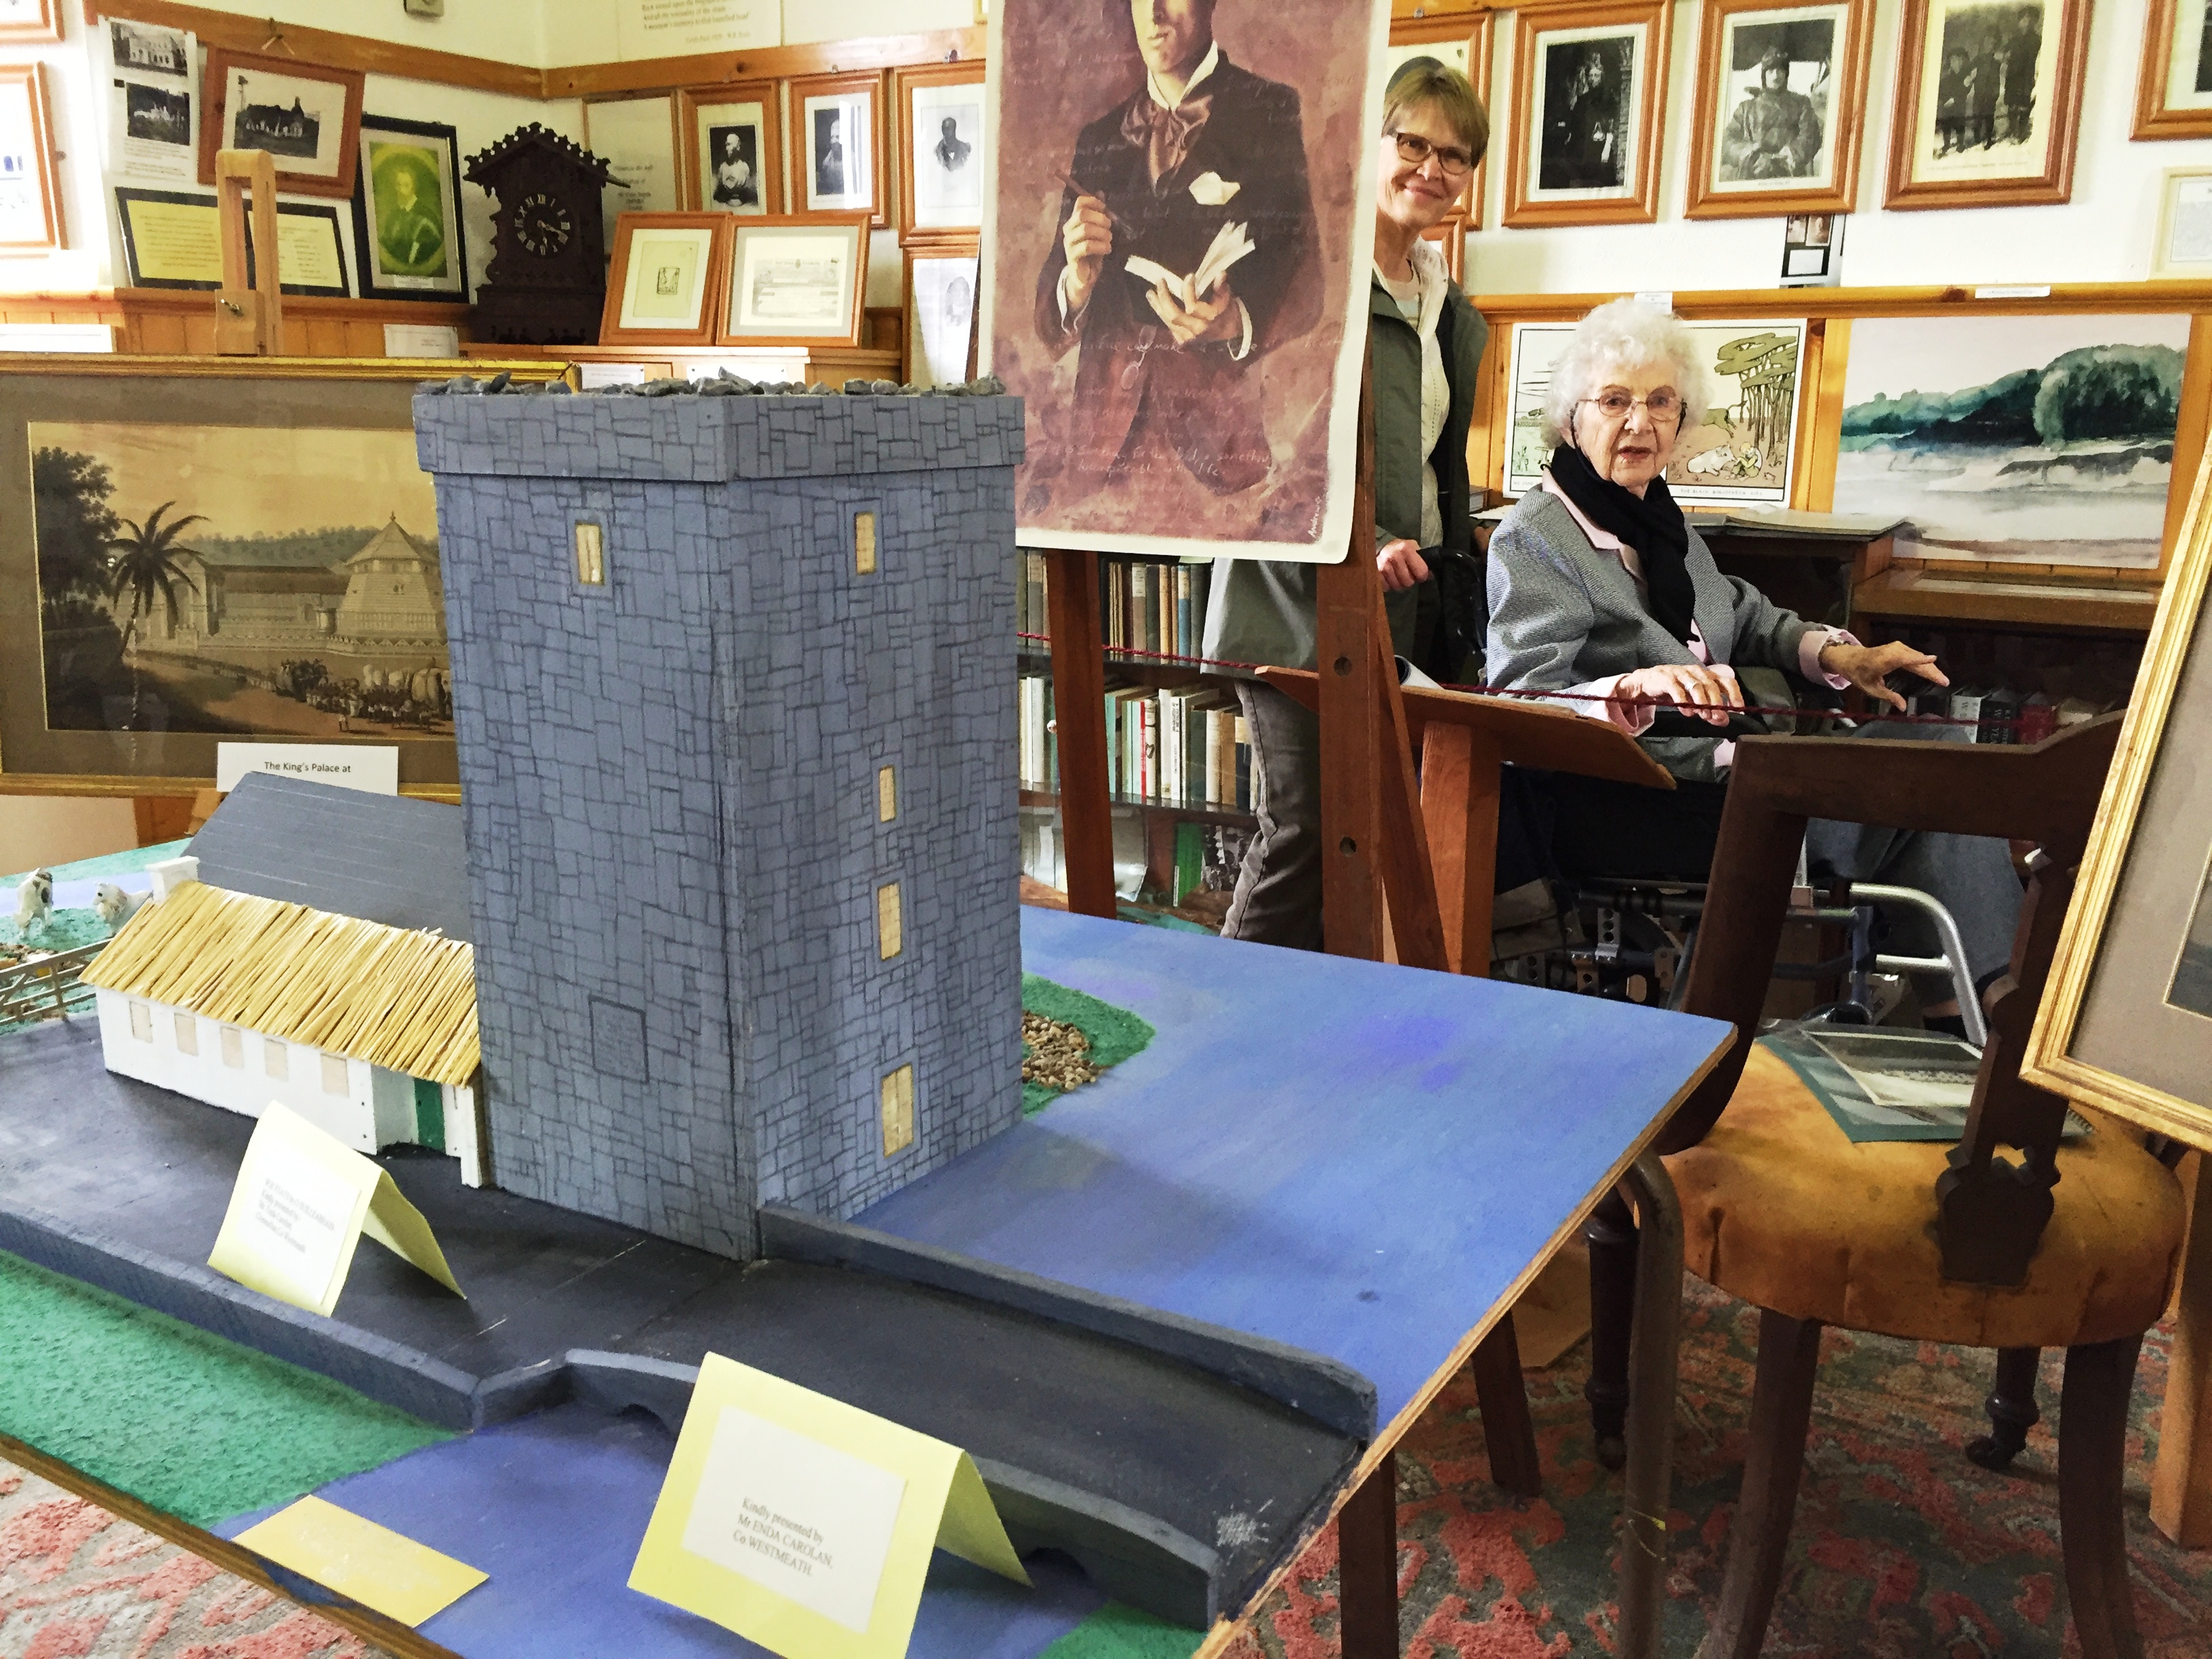 Sara and Roberta at Kiltartan Gregory Museum, with model of Thoor Ballylee in the foreground. Photo by Martha Clark.